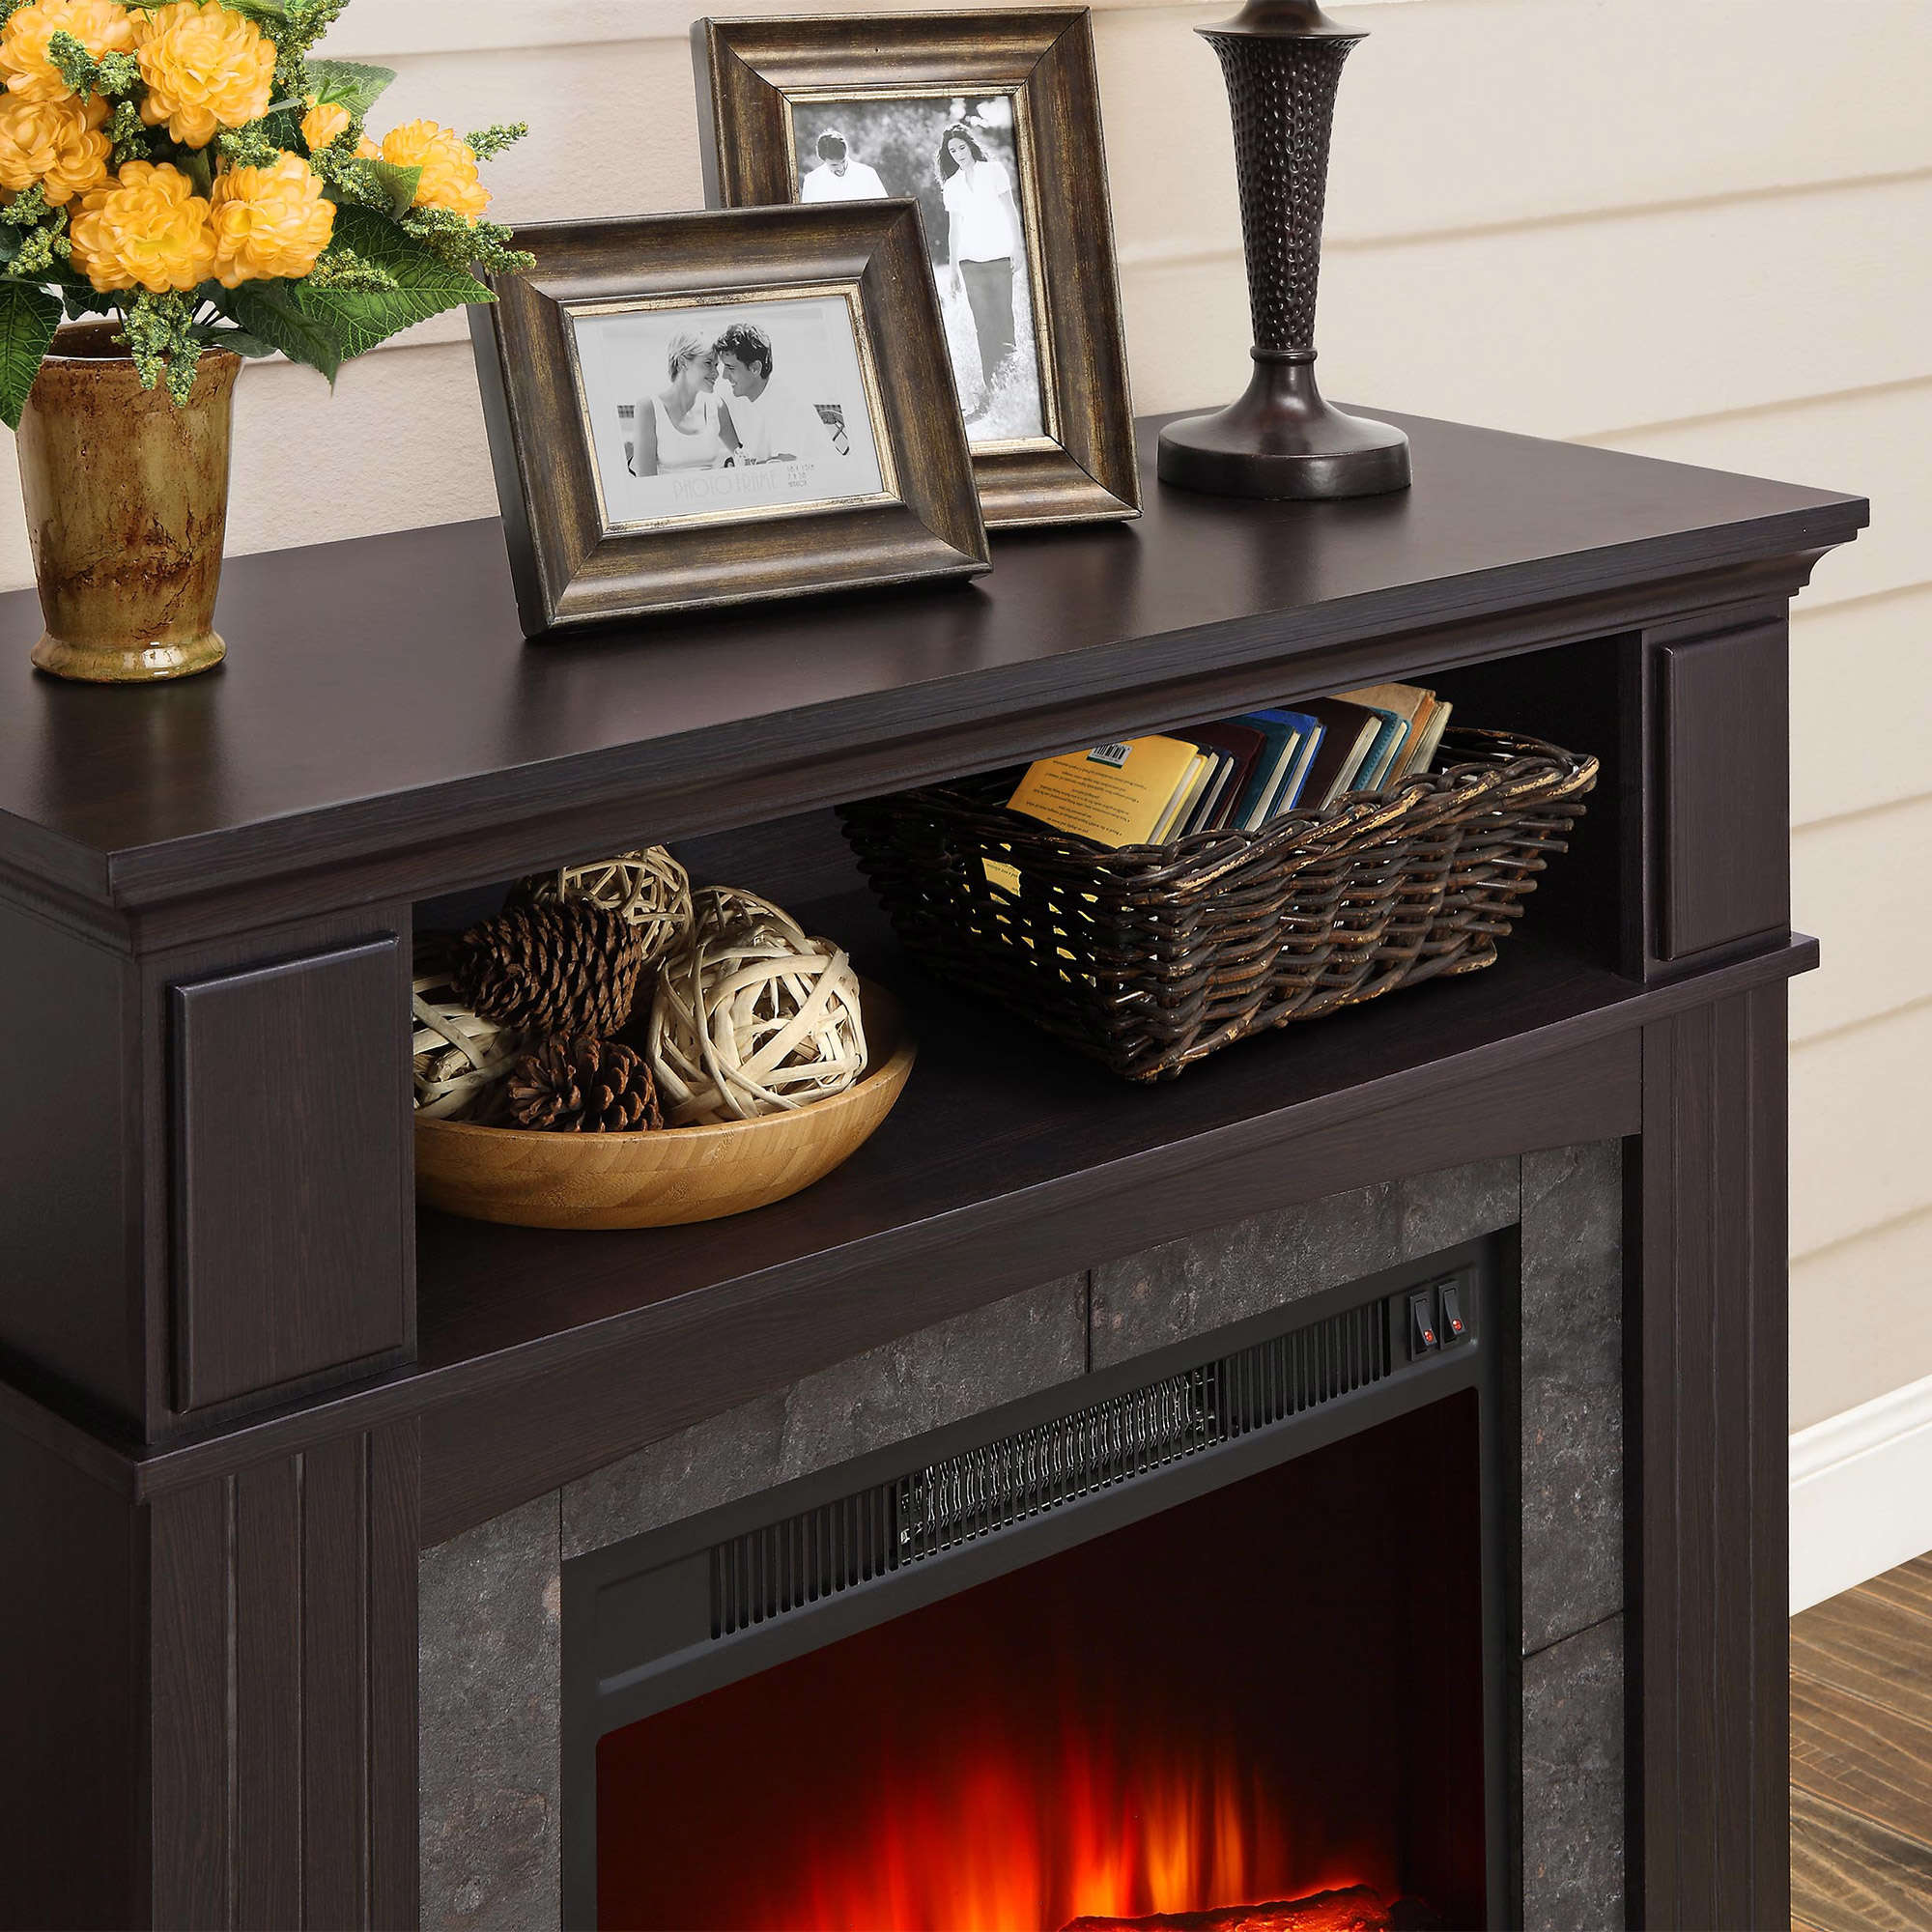 Whalen Media Fireplace for Your Home Television Stand fits TVs up to 50" Espresso Finish - image 5 of 5